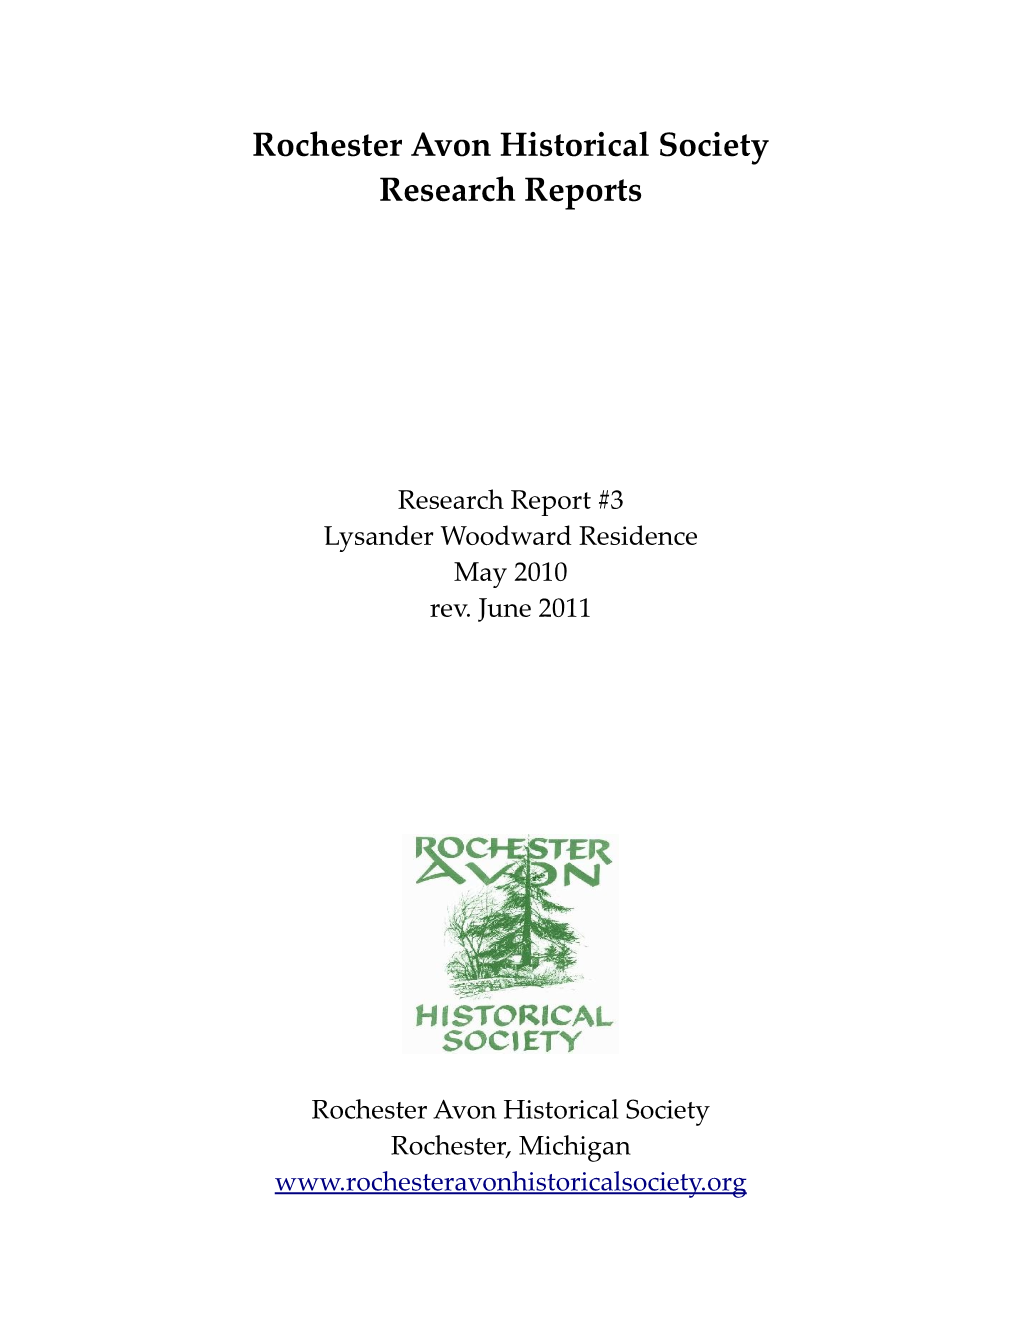 Rochester Avon Historical Society Research Reports